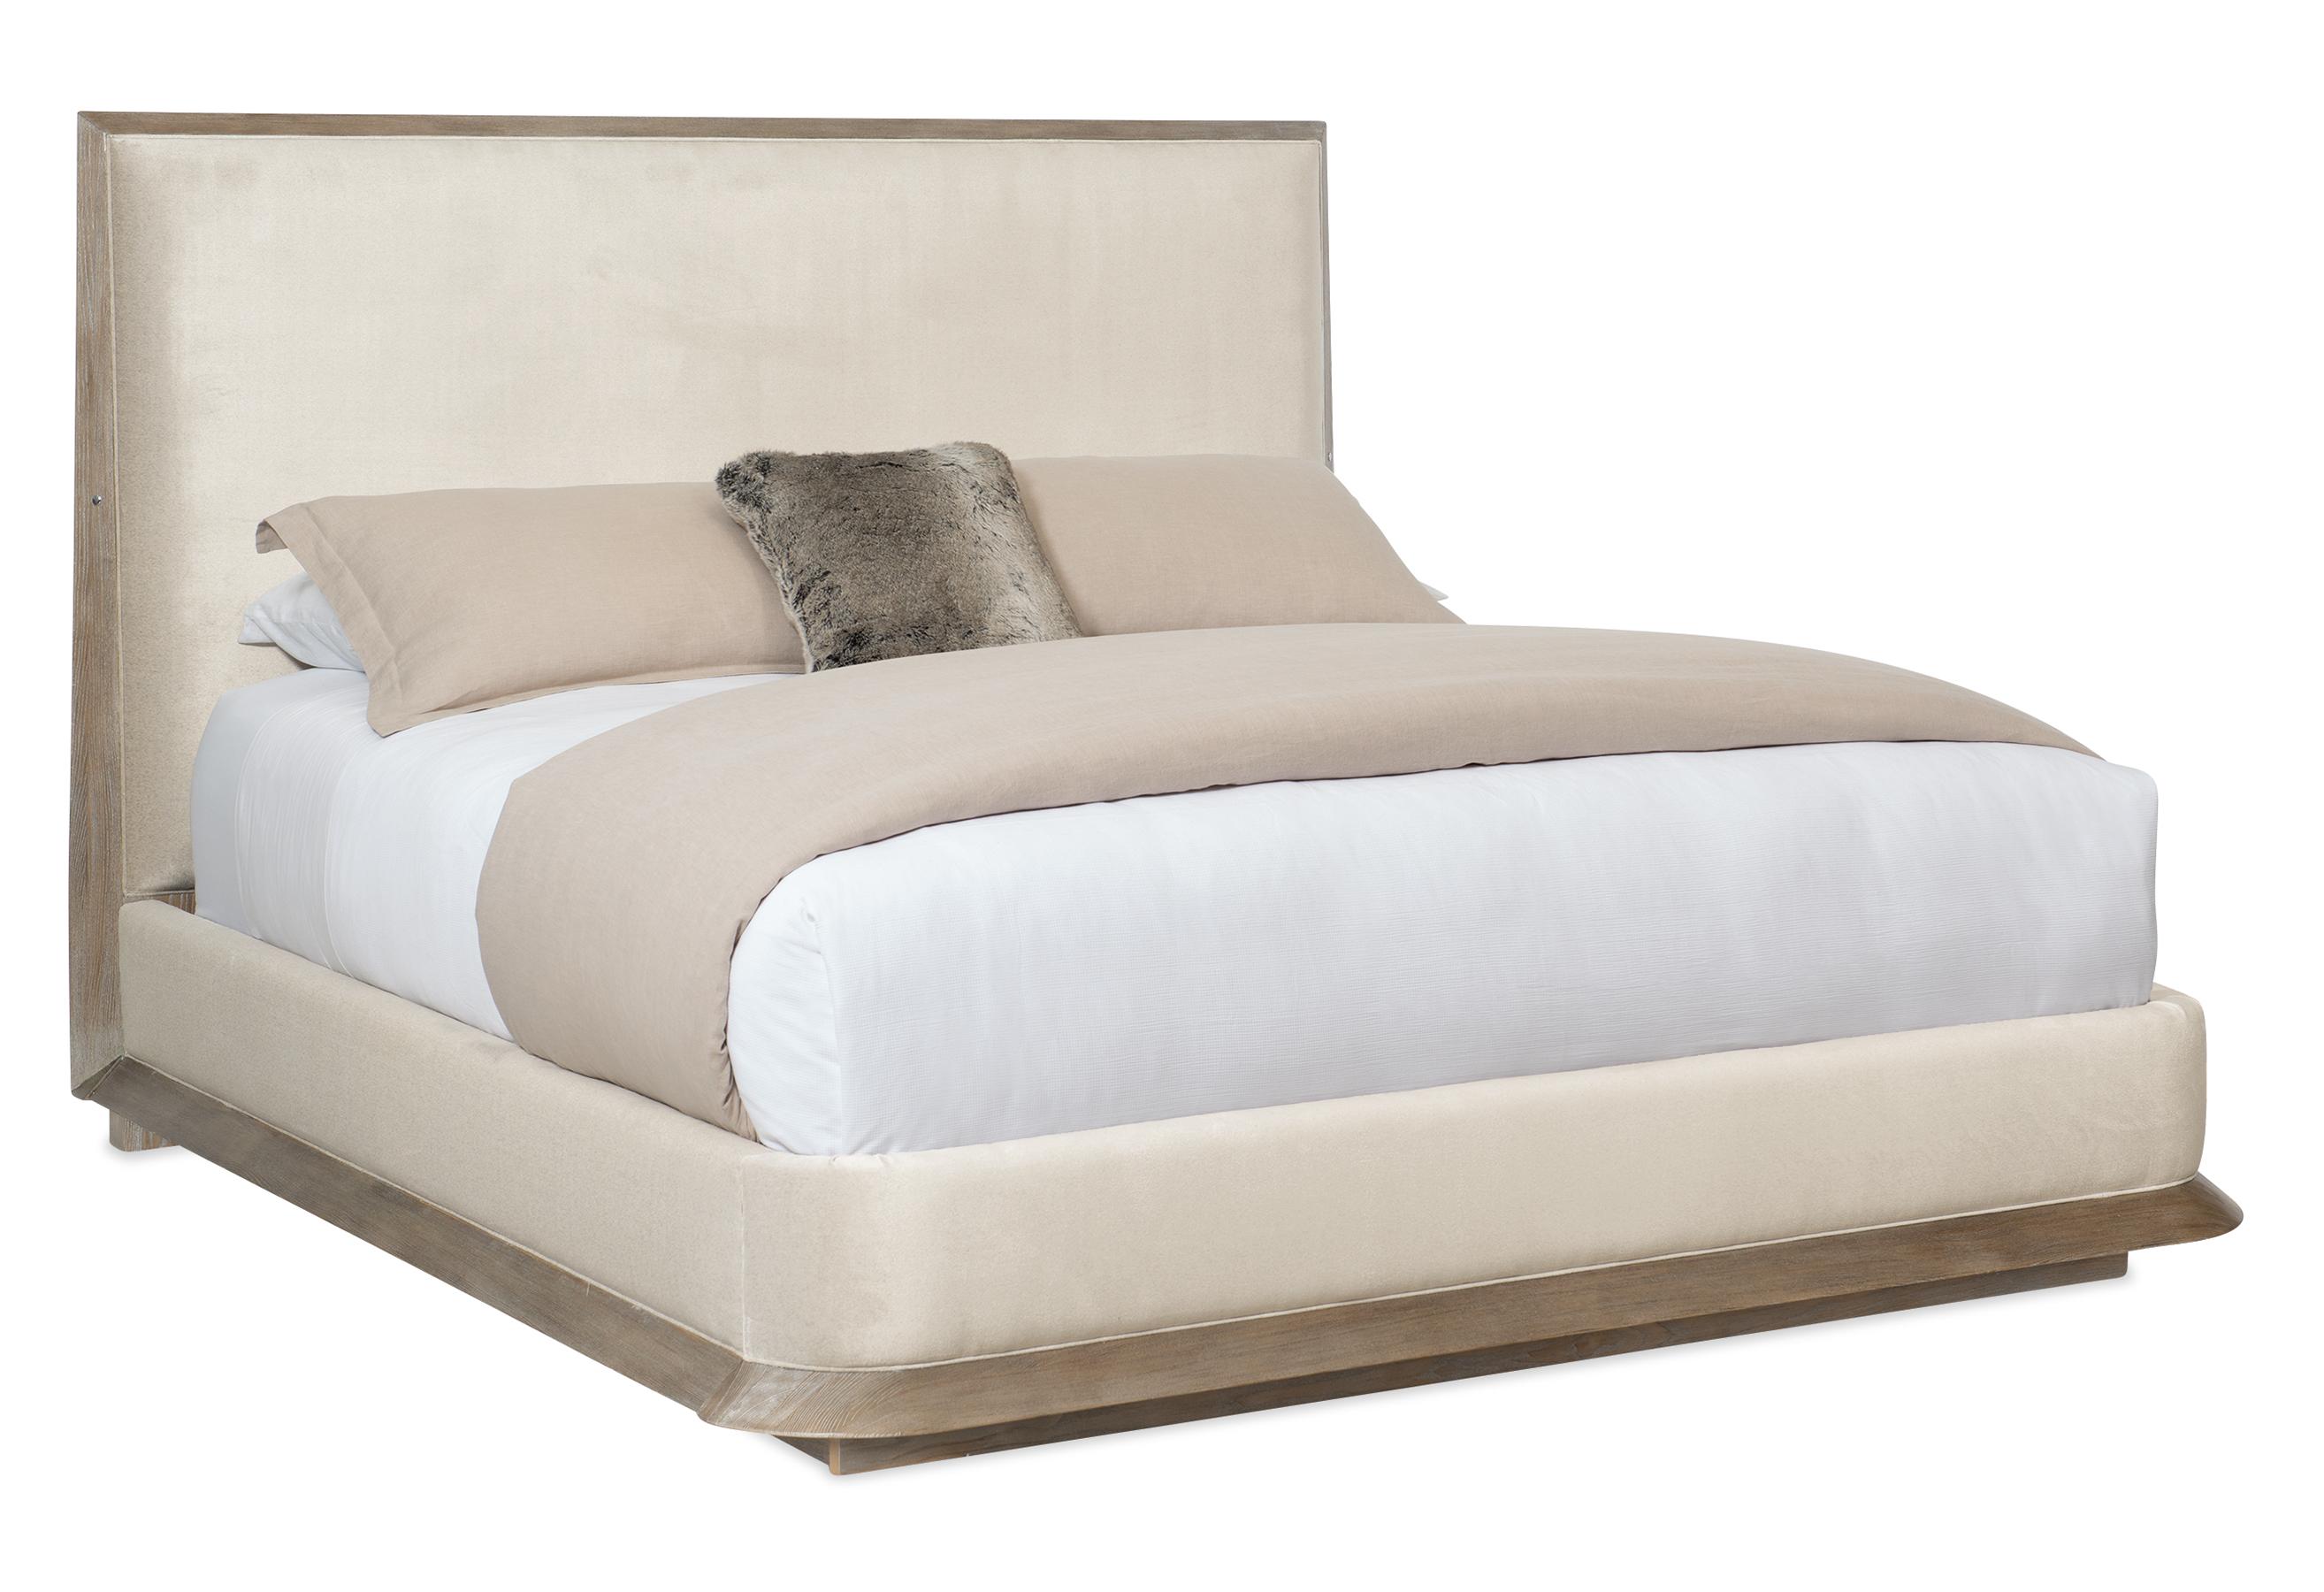 Contemporary Platform Bed THE STAGE IS SET CLA-019-1211 in Neutral Fabric